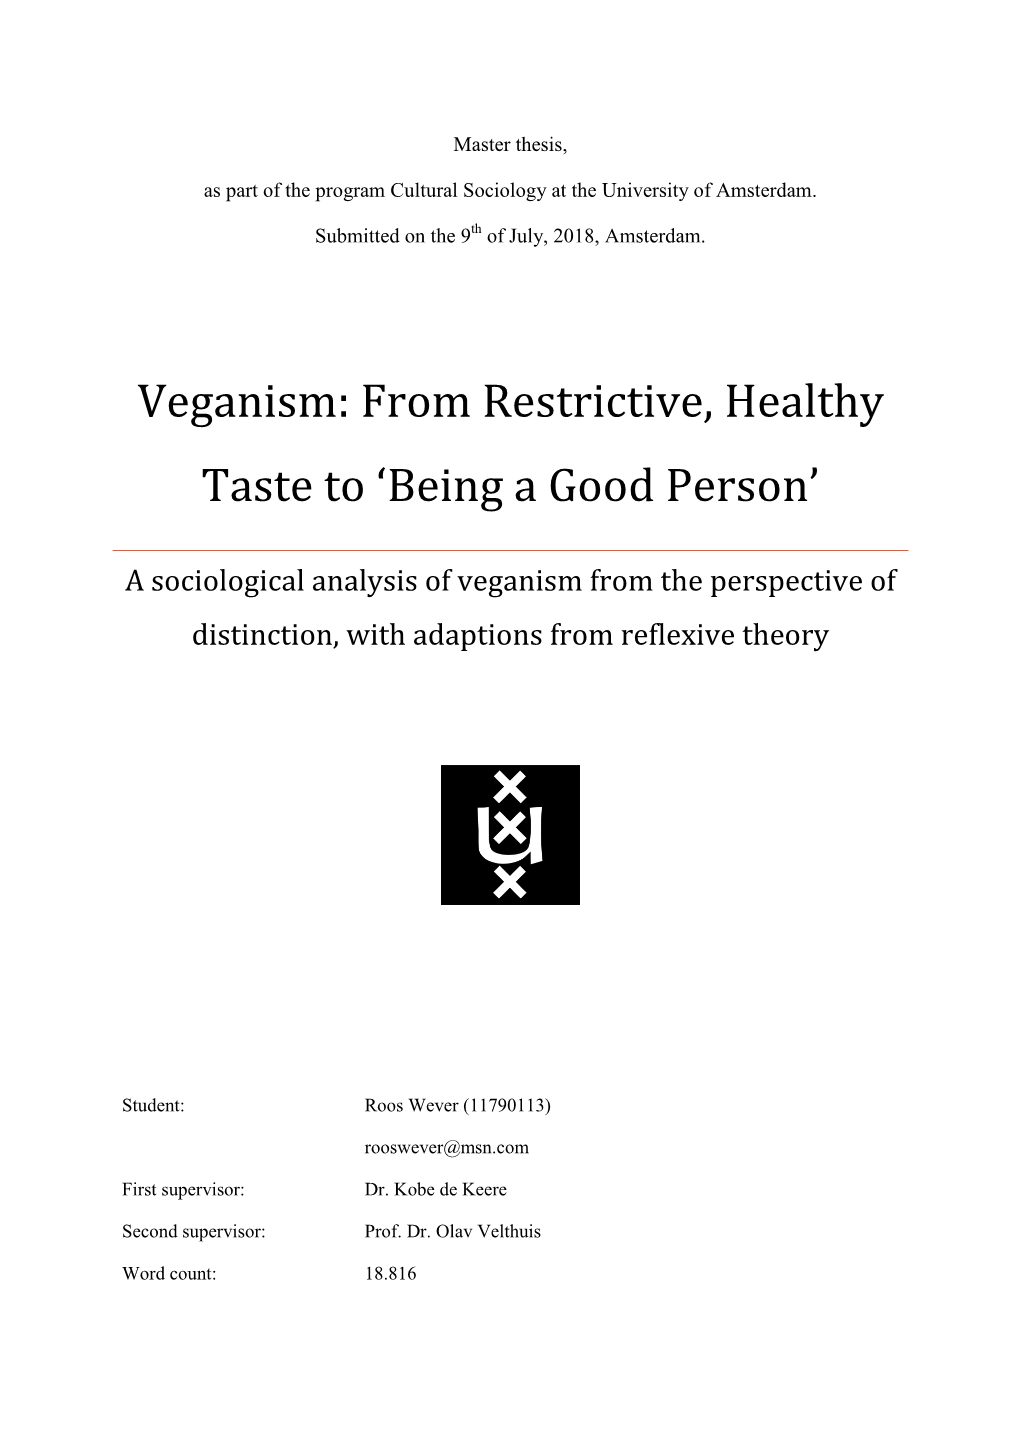 Veganism: from Restrictive, Healthy Taste to ‘Being a Good Person’